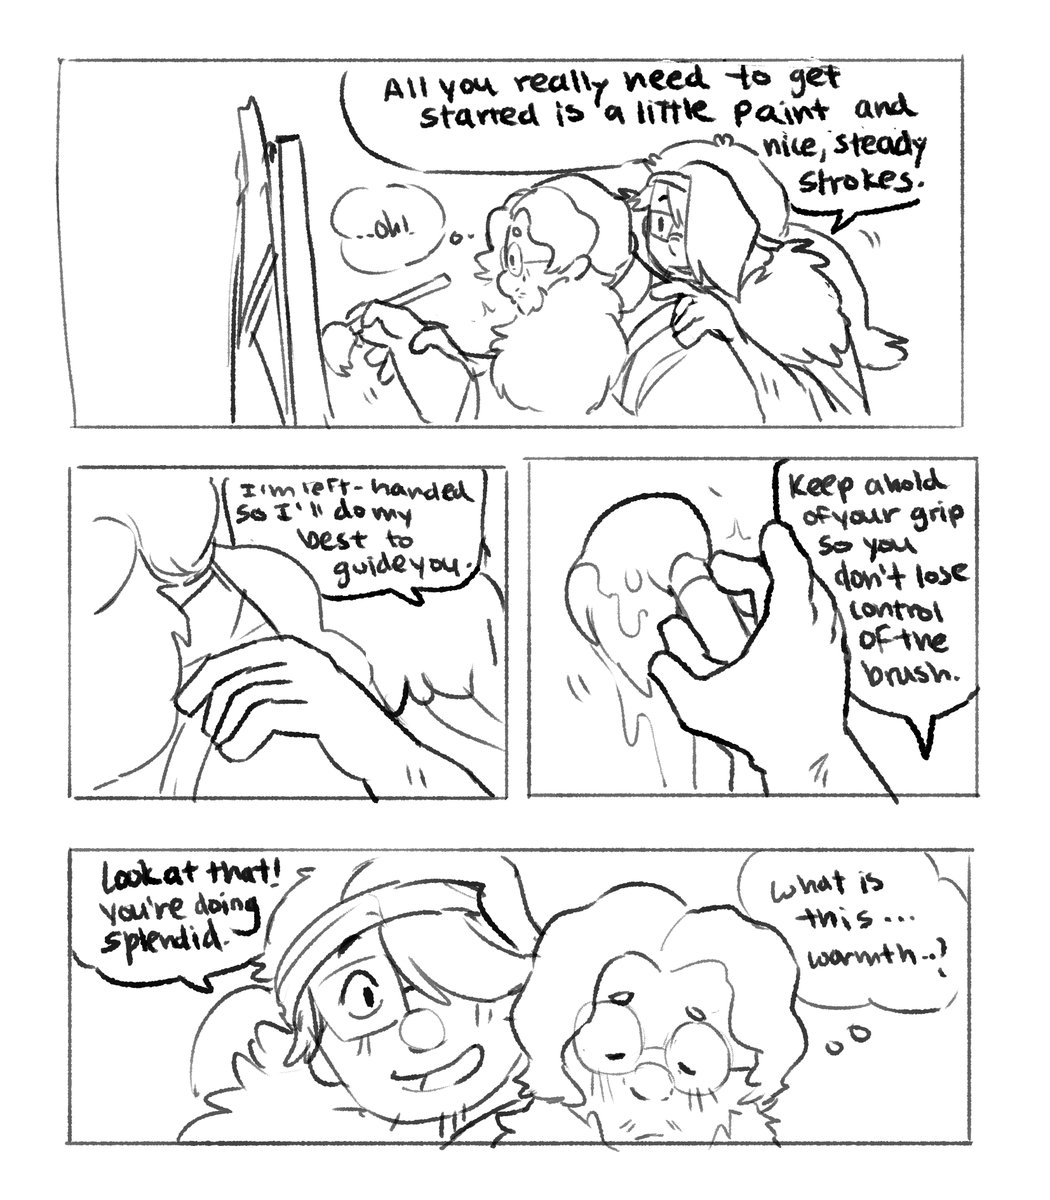 reposting from tumblr but here's a sheosmith comic! 